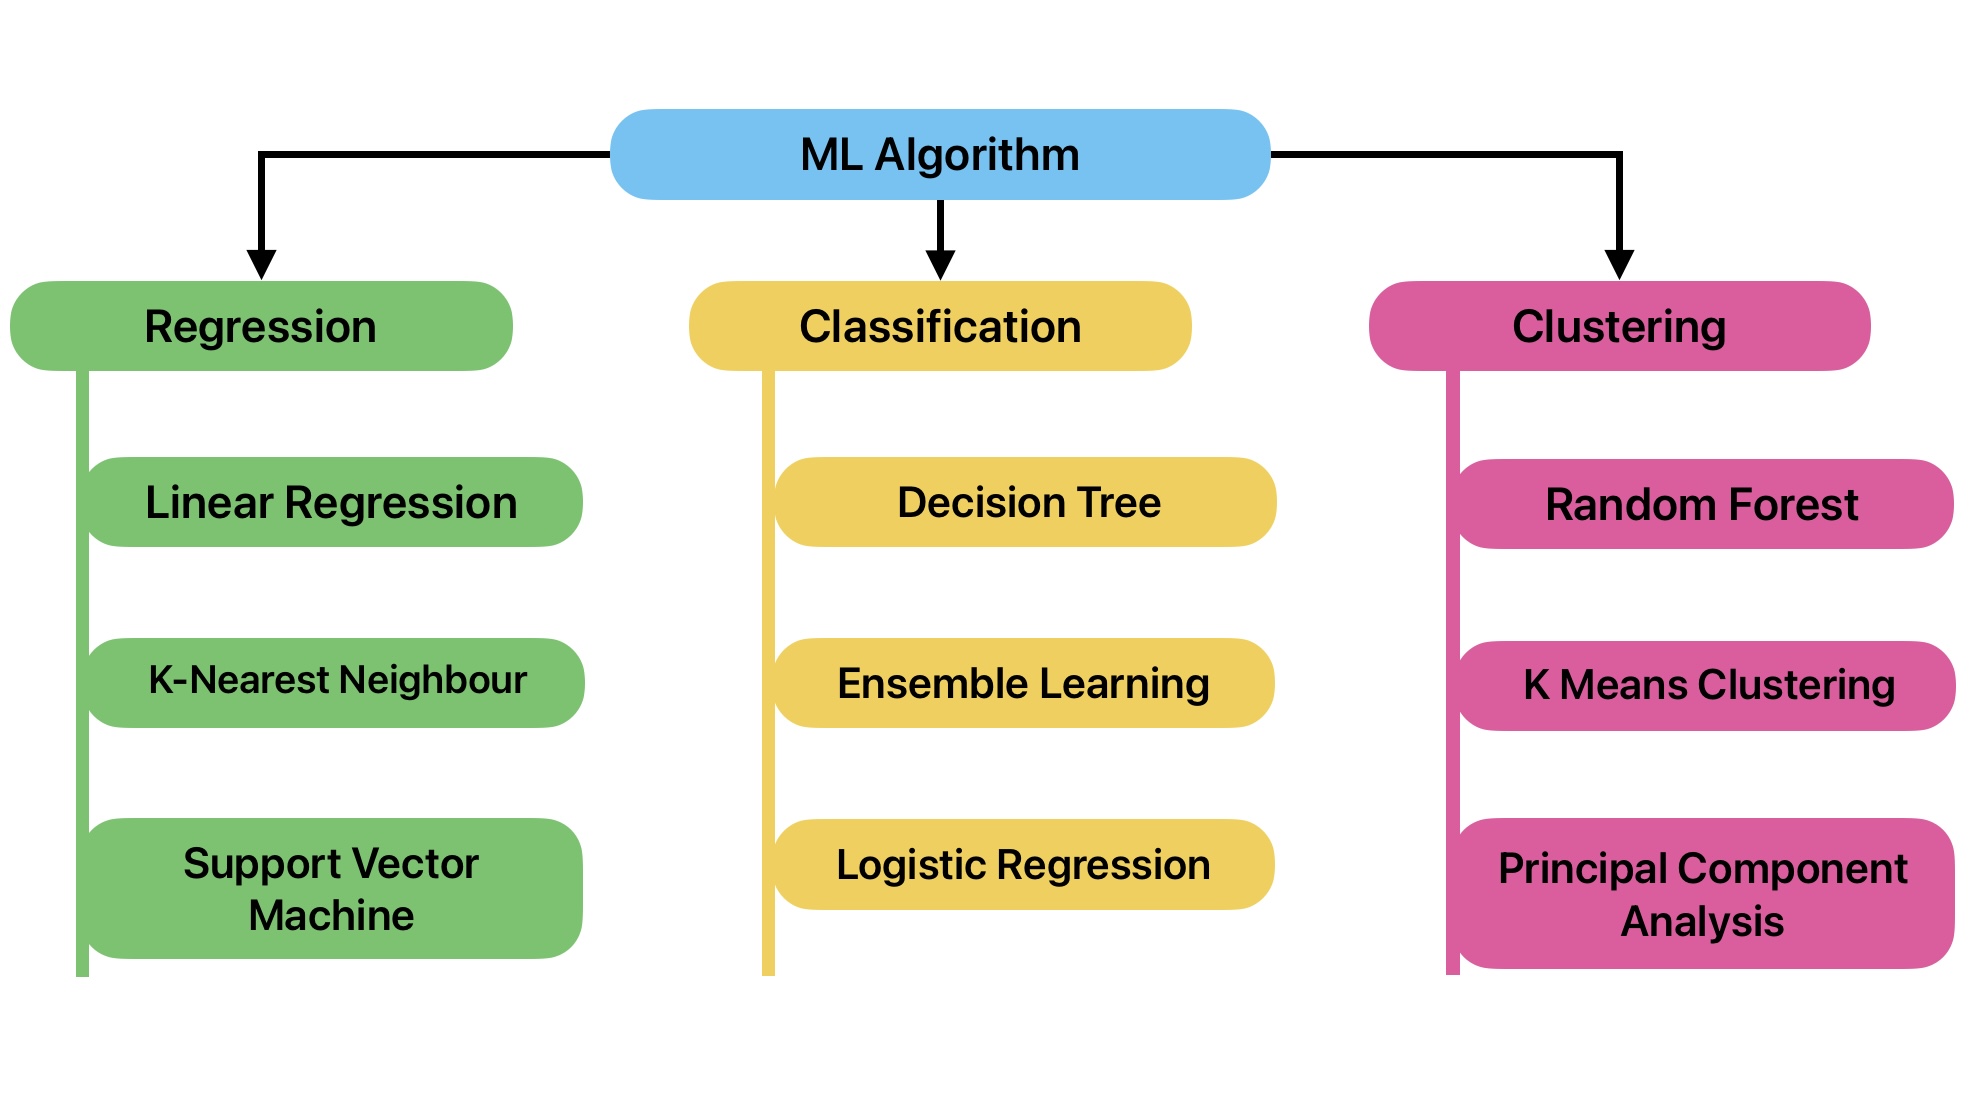 This image shows a list of machine learning algorithms